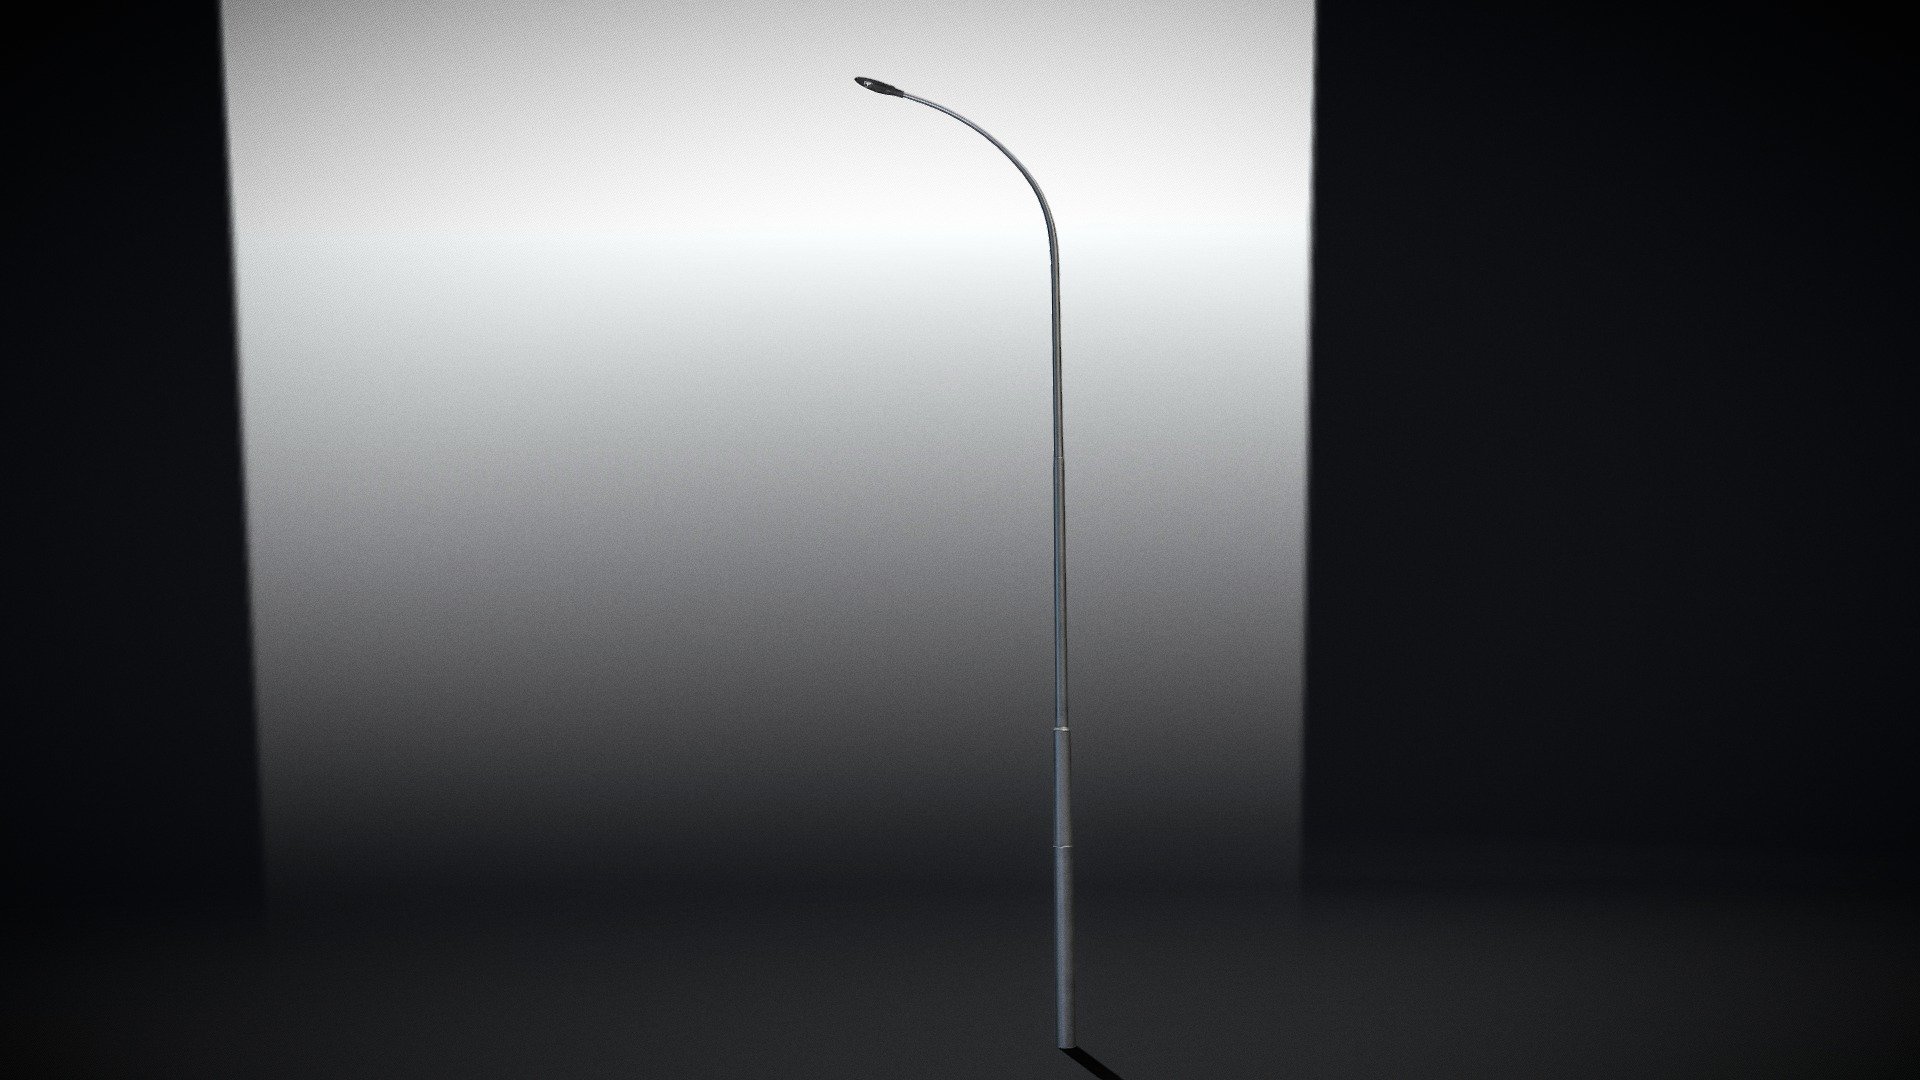 Street Light 14 version 15 (10m) with pole 1.




one object

vertices = 4310

edges = 8395

polygons = 4175

object dimension  2.644m x 0.279m x 11.521m

object rotation and location is 0, scale is 1.000 x 1.000 x 1.000

three PBR material with 4k textures

texture types: Base Color, Normal, Metalness, Roughness



**Here are some other street lights: **




Street Light 11 (Low-Poly Version 1)

Street Light (2) Wall-Version (High-Poly) 

Street Light (3) (Low-Poly Version) 

Street Light (4) (High-Poly Version) 

Street Light (5) High-Poly Version

Street Light (7) Galvanized Iron Version

All Street Light



Modeled and textured by 3DHaupt in Blender-2.90 - Street Light 14 v.15 (10m) (Pole 1) - Buy Royalty Free 3D model by VIS-All-3D (@VIS-All) 3d model